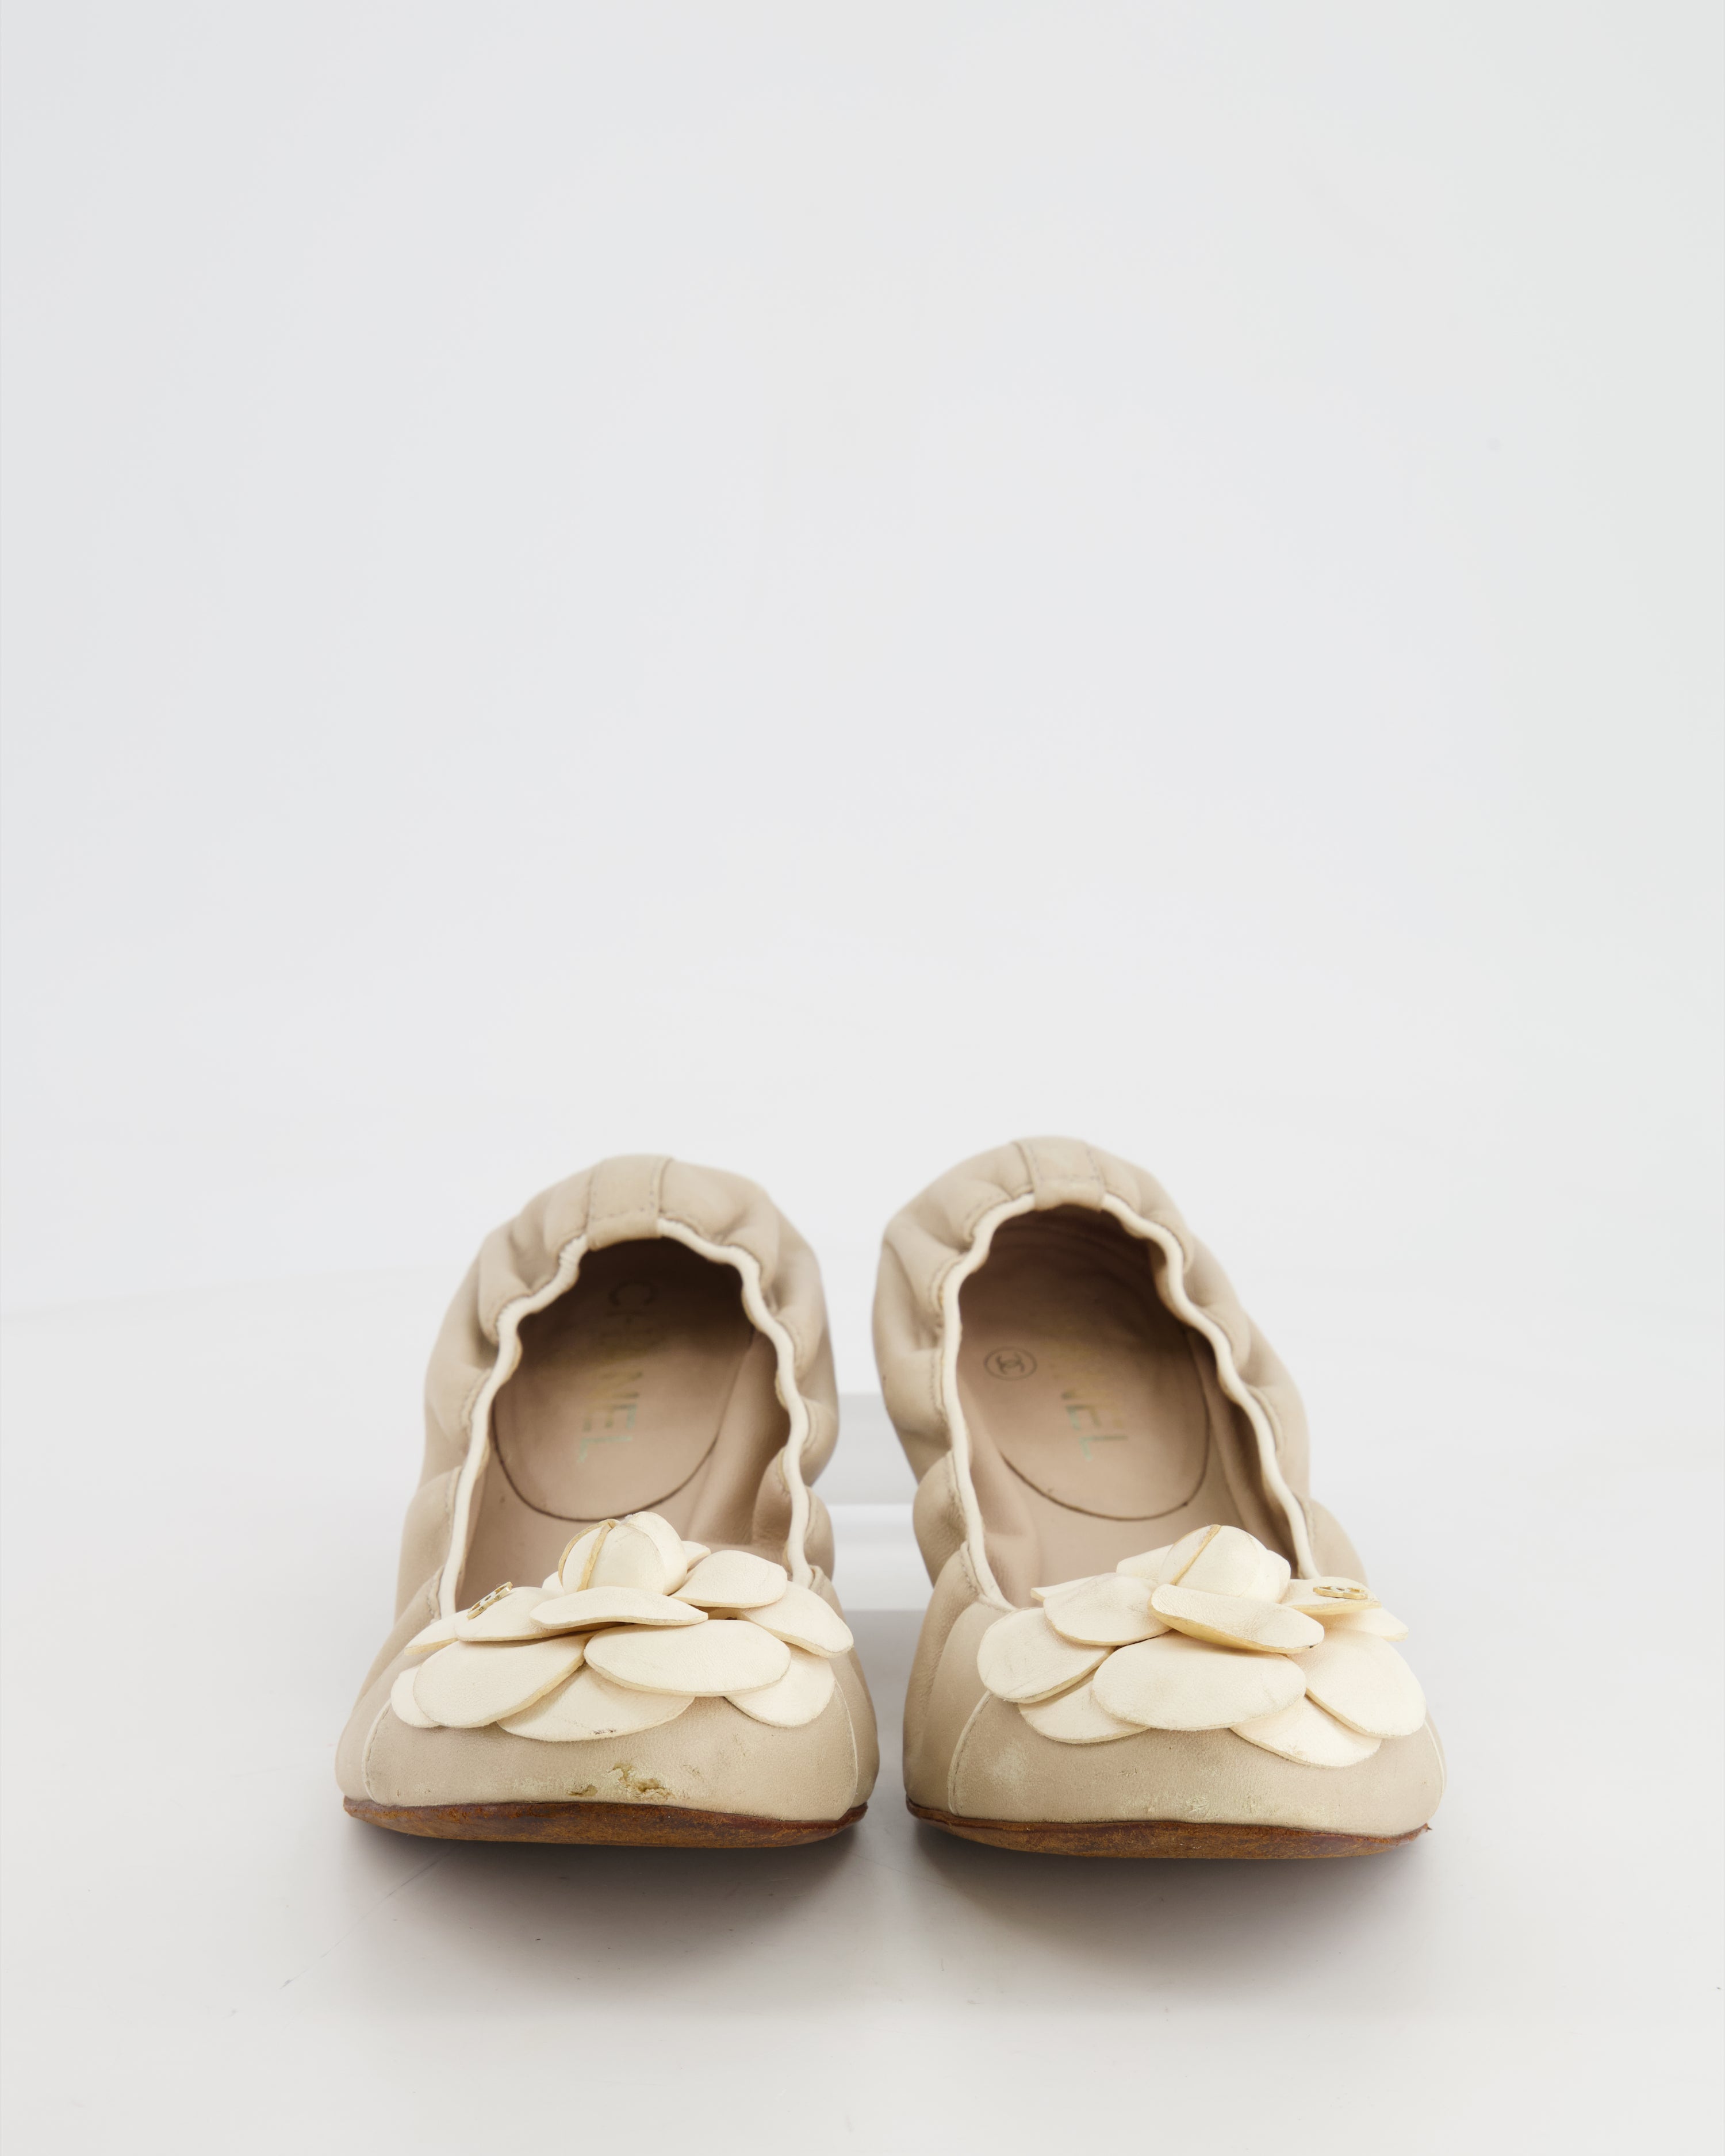 SLASH PRICE* Chanel Beige and White Leather Camélia Elasticated Ballerina with Gold CC Logo Detail Size EU 39